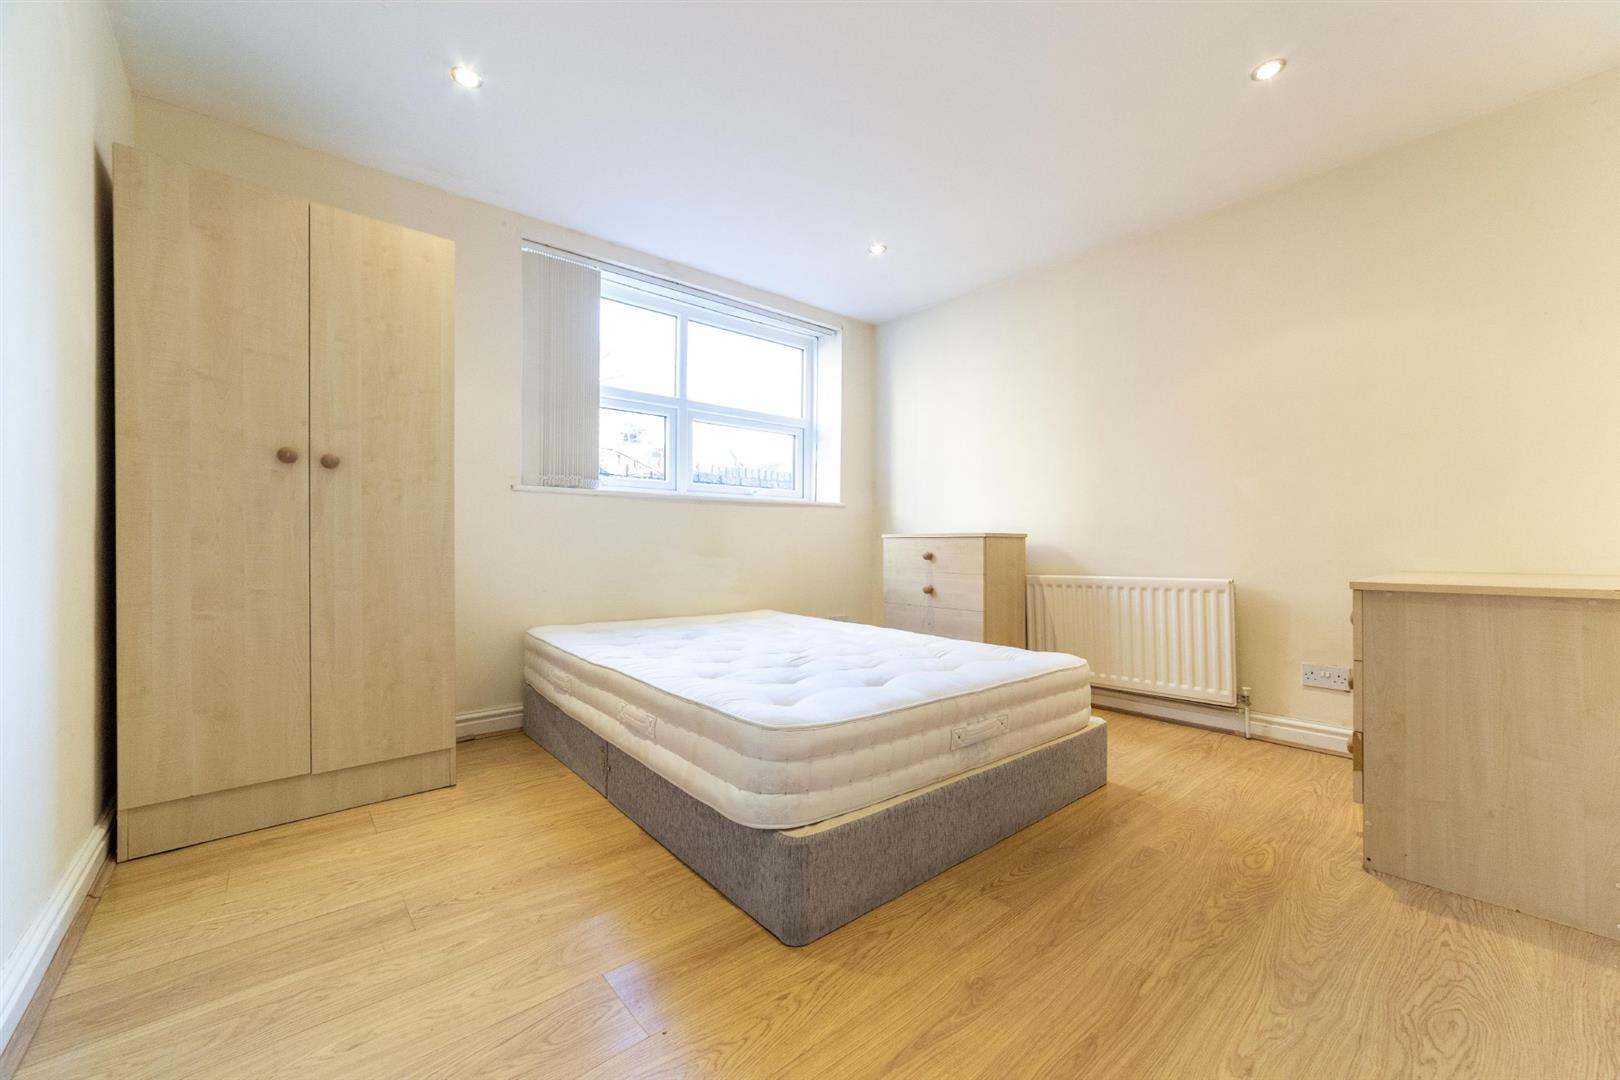 3 bed apartment to rent in Rothbury Terrace, Heaton  - Property Image 10